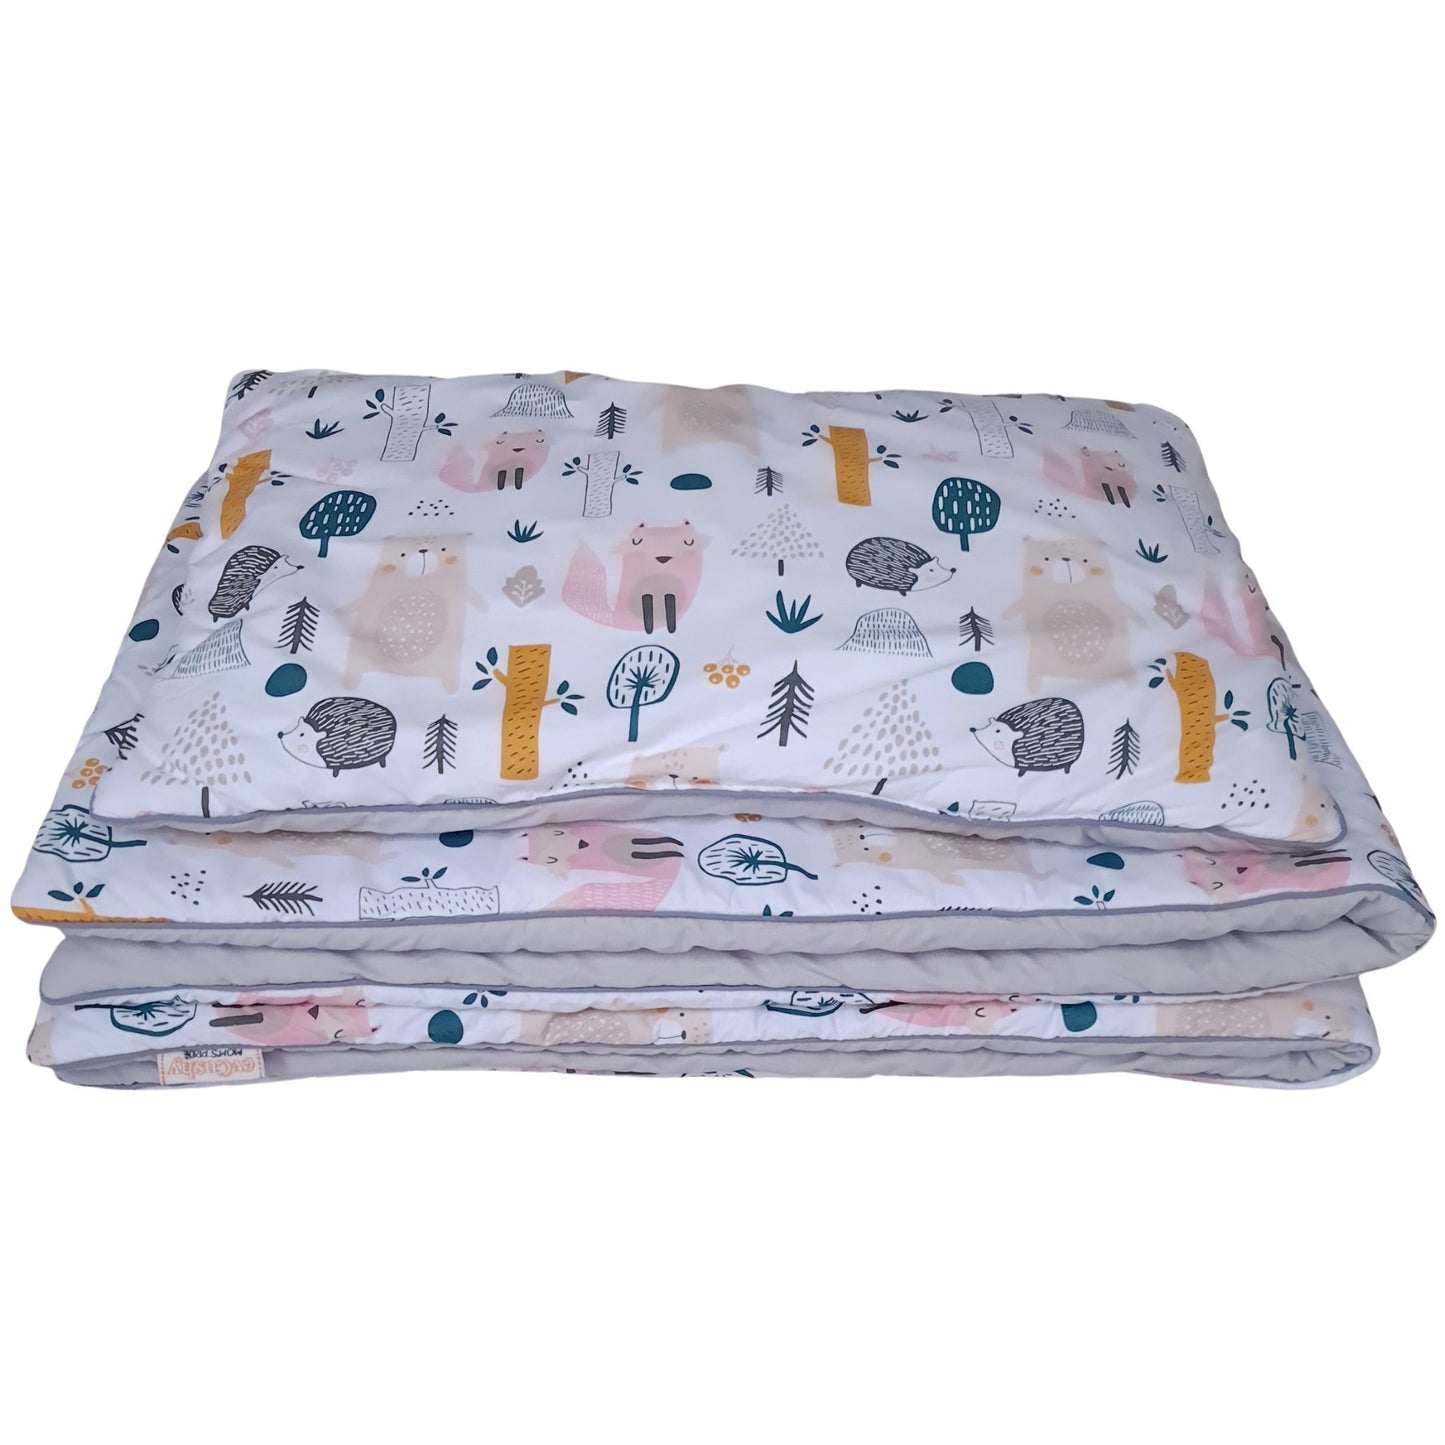 evcushy duvet quilt blanket and pillow toddler size double sided forest print pattern grey 100% cotton